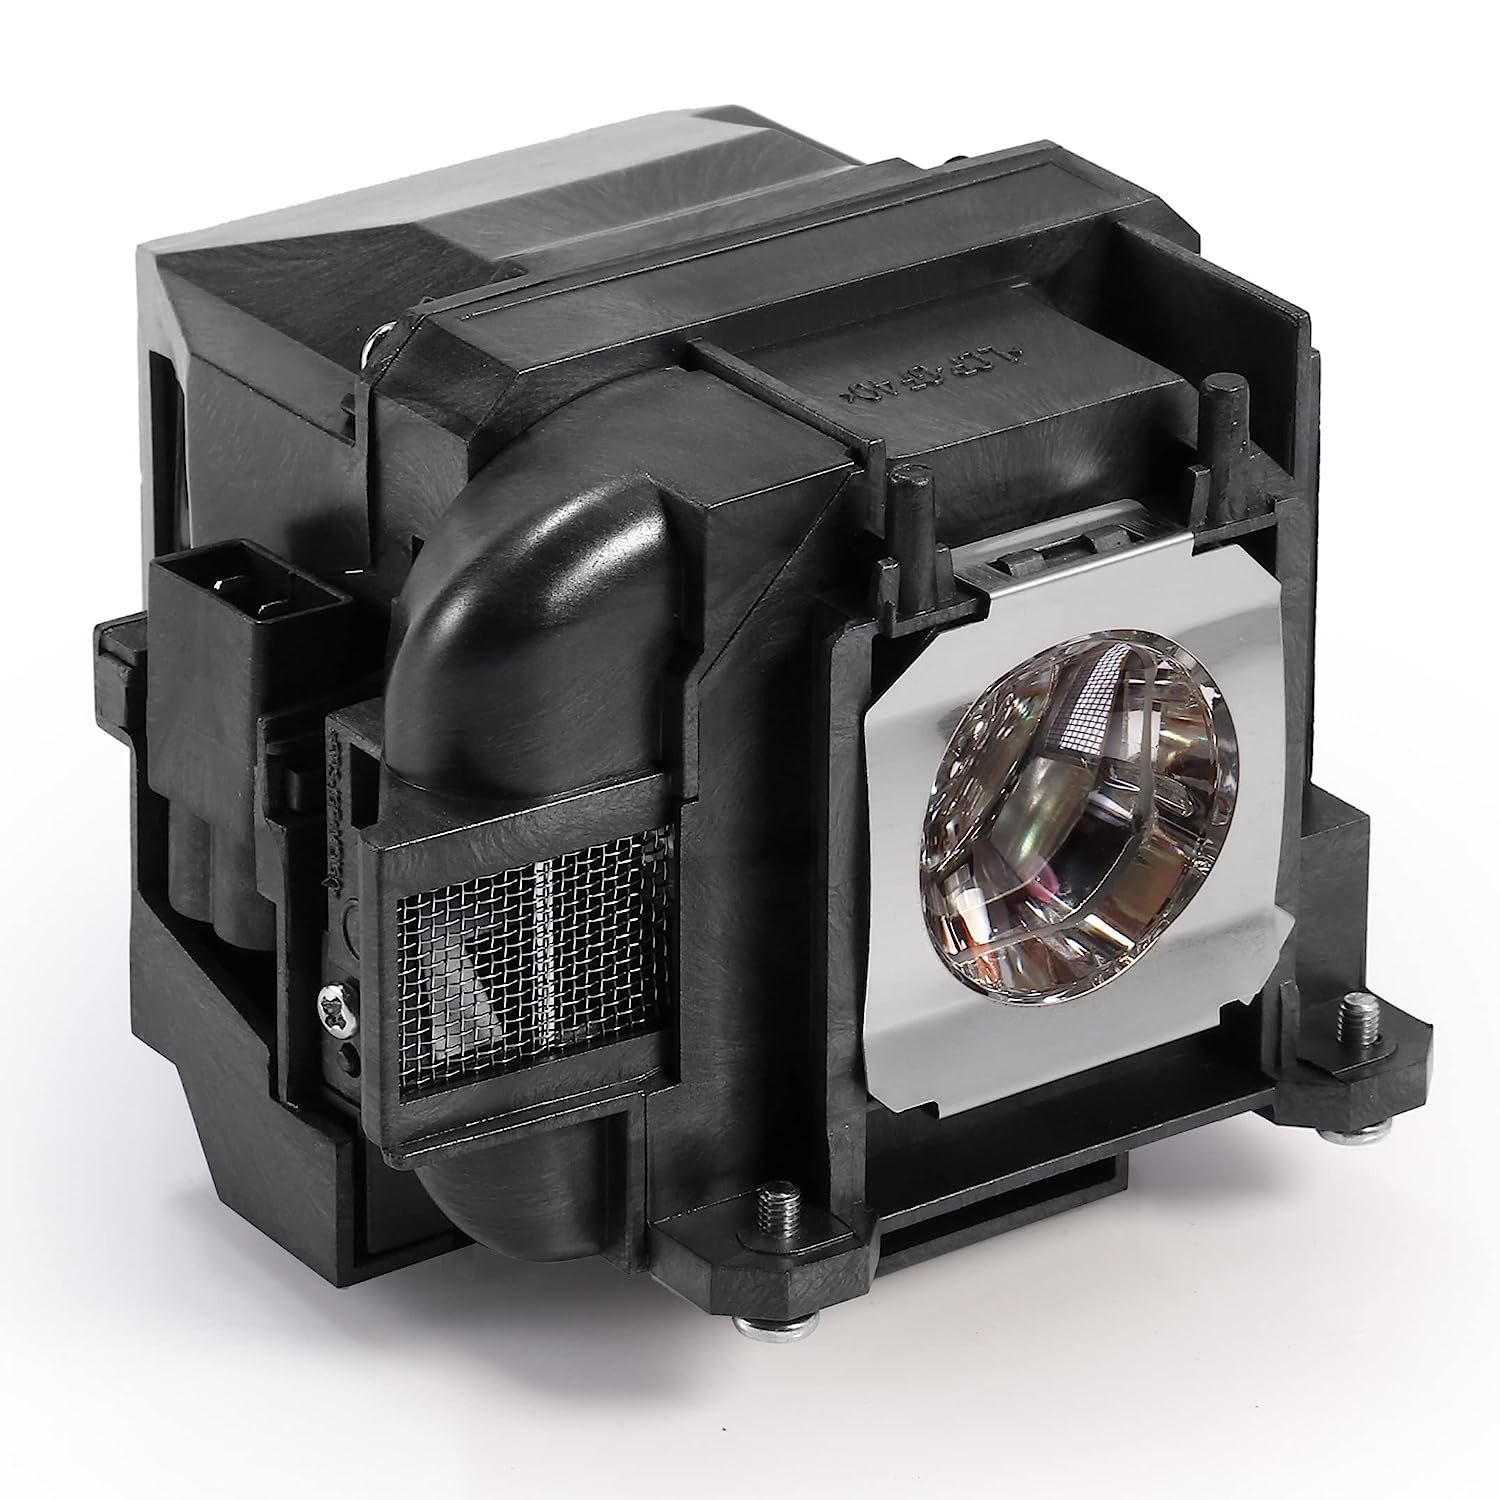 Replacement Projector Lamp Bulb For Epson Elplp78 V13H010L78 Powerlite Home Cine - $73.32